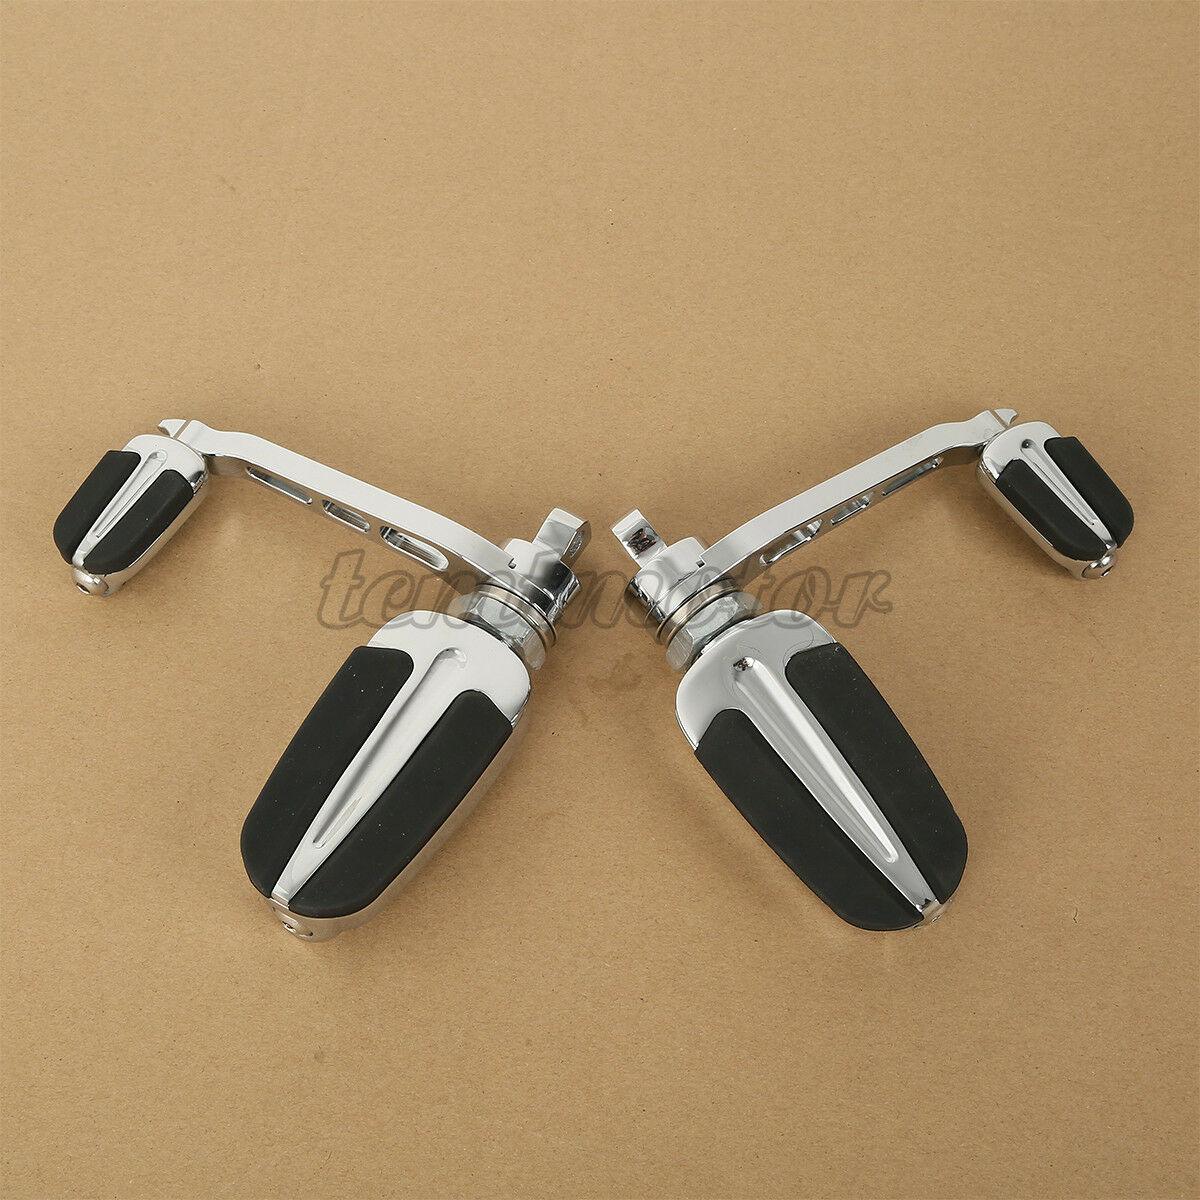 New Chrome Slipstream Foot Pegs &Heel Rest For Harley HD Dyna Softail Sportster - Moto Life Products